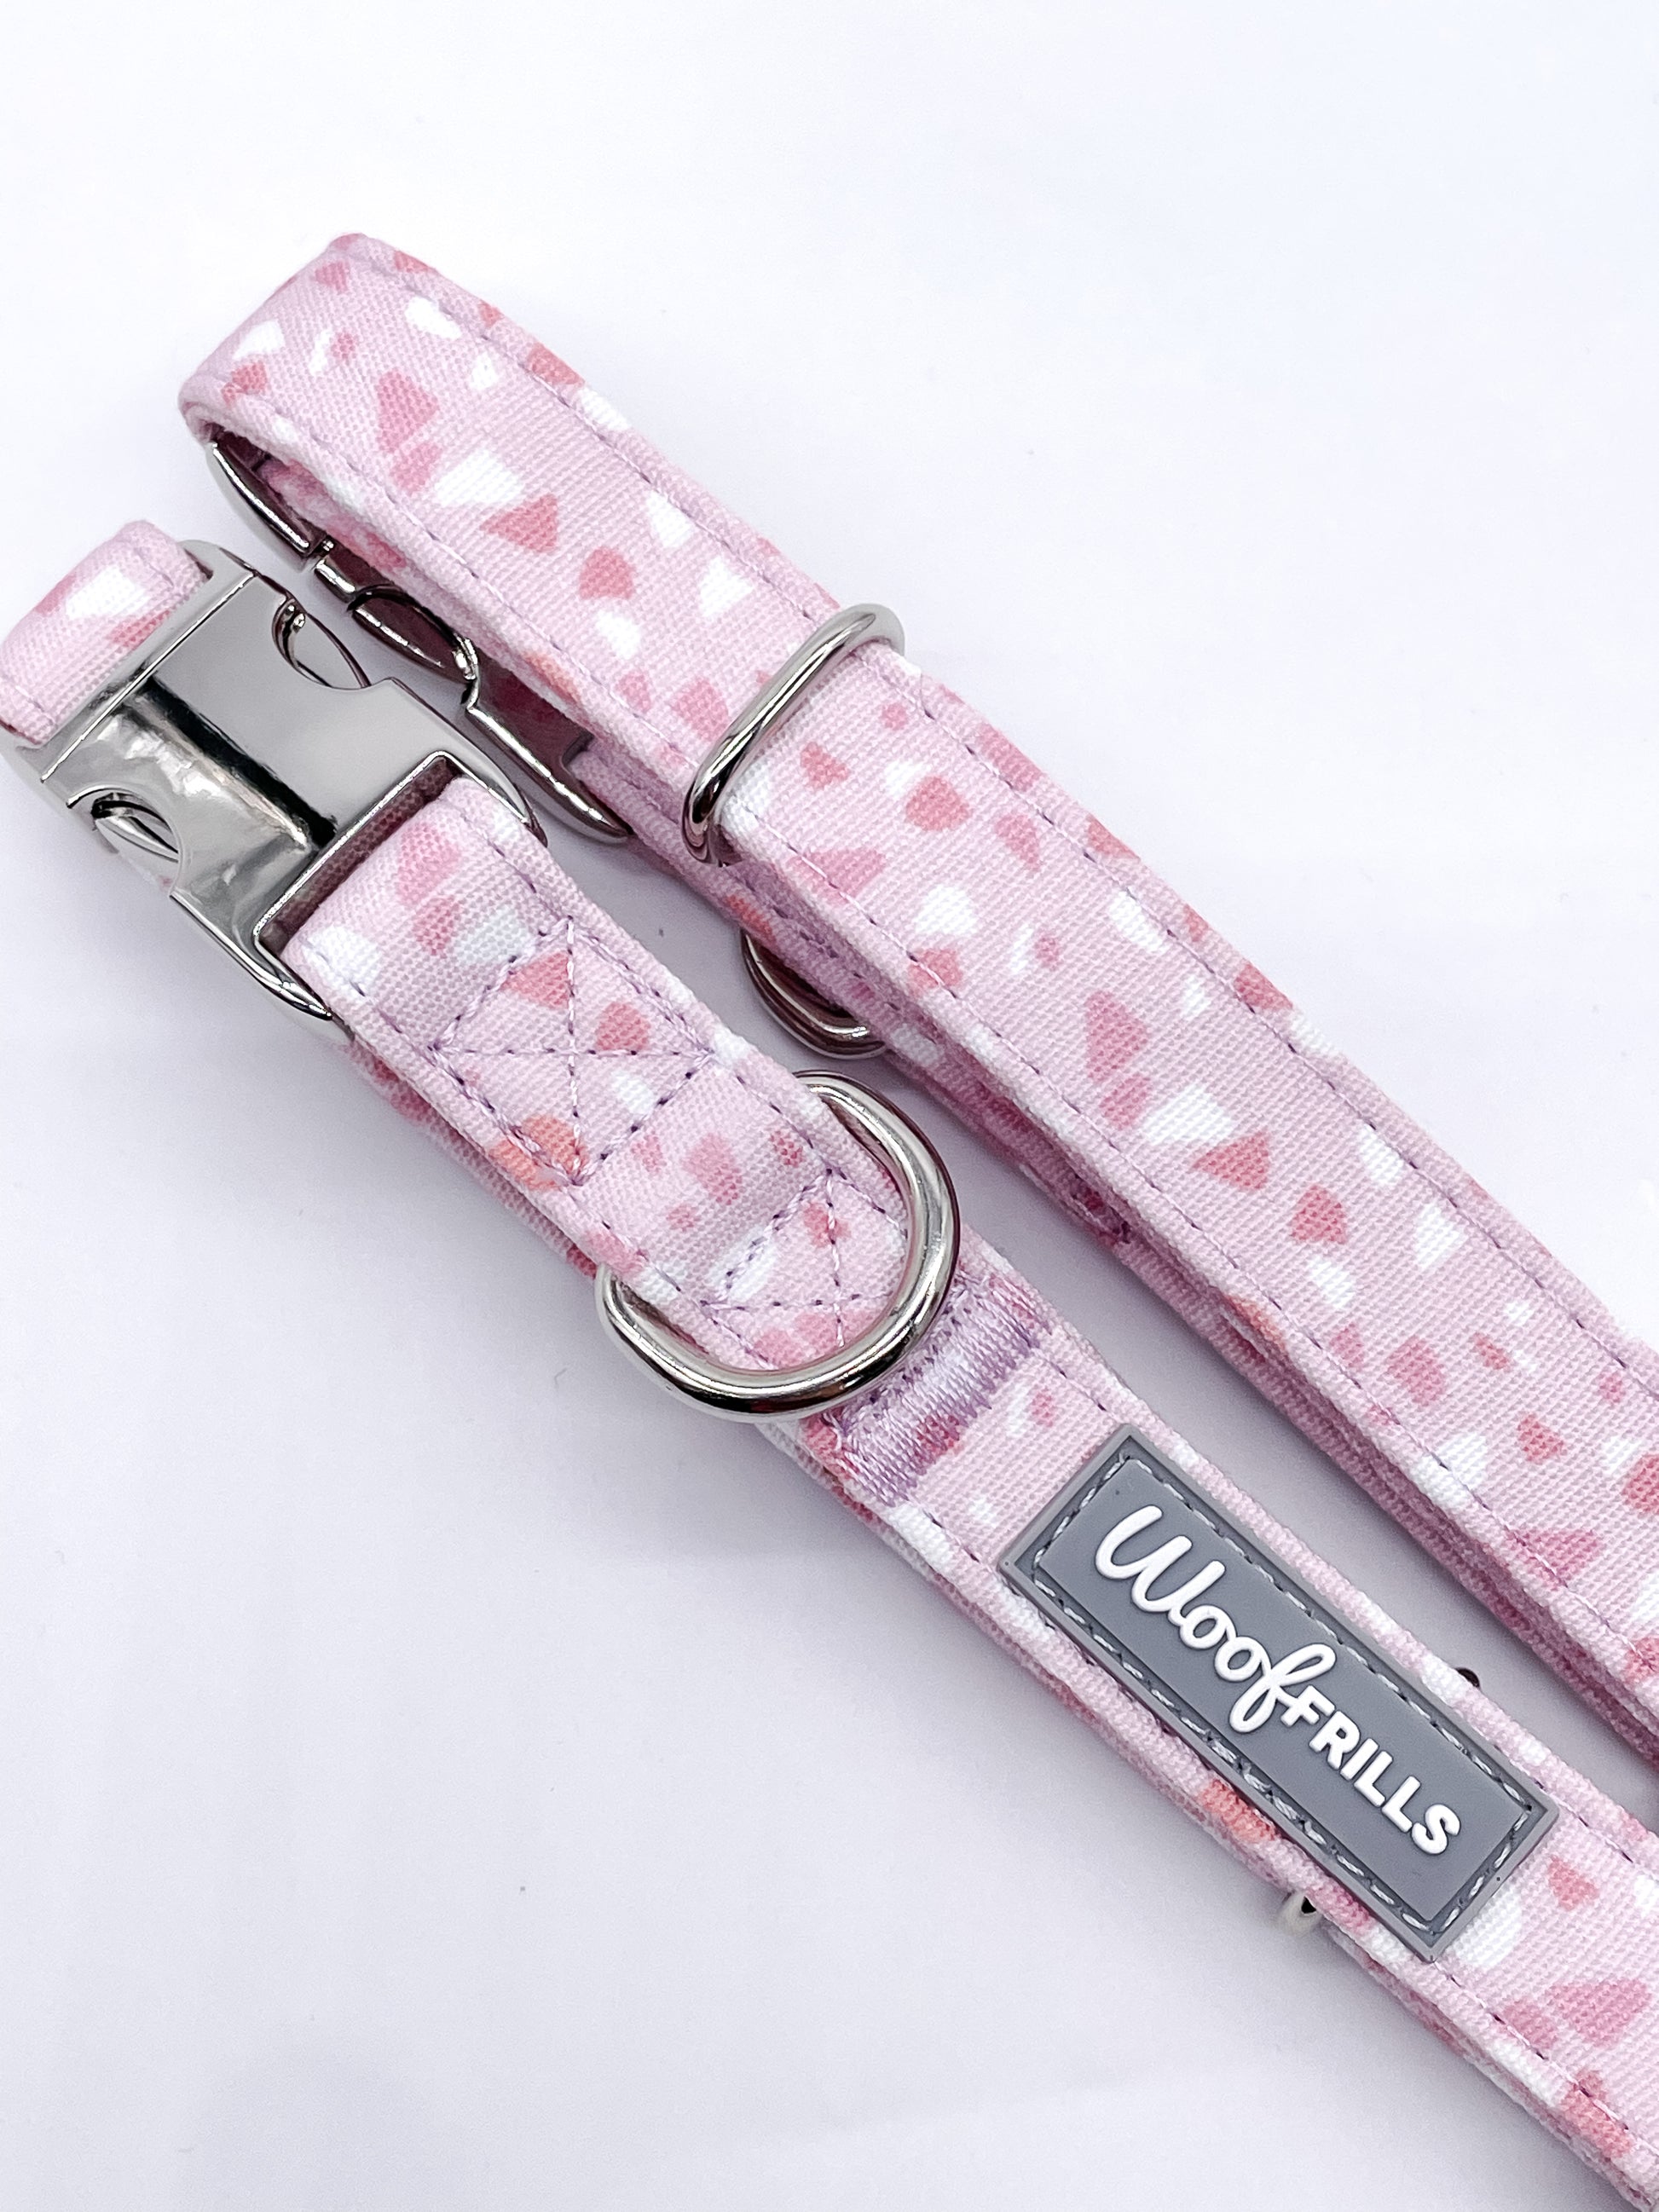 Pink collar for dogs